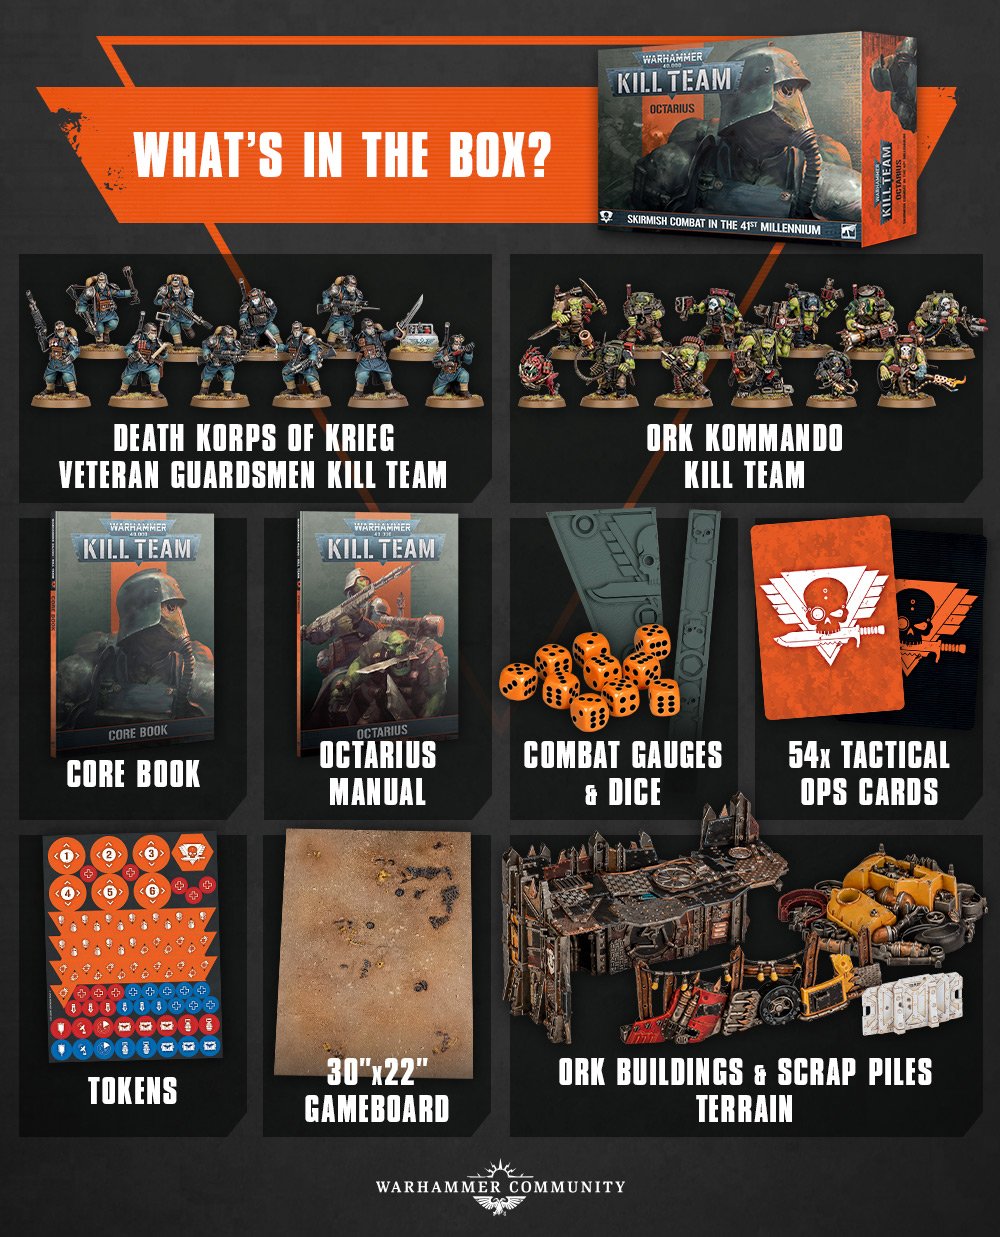 Shock and Ork: How M2 brought a Warhammer: Kill Team battle to